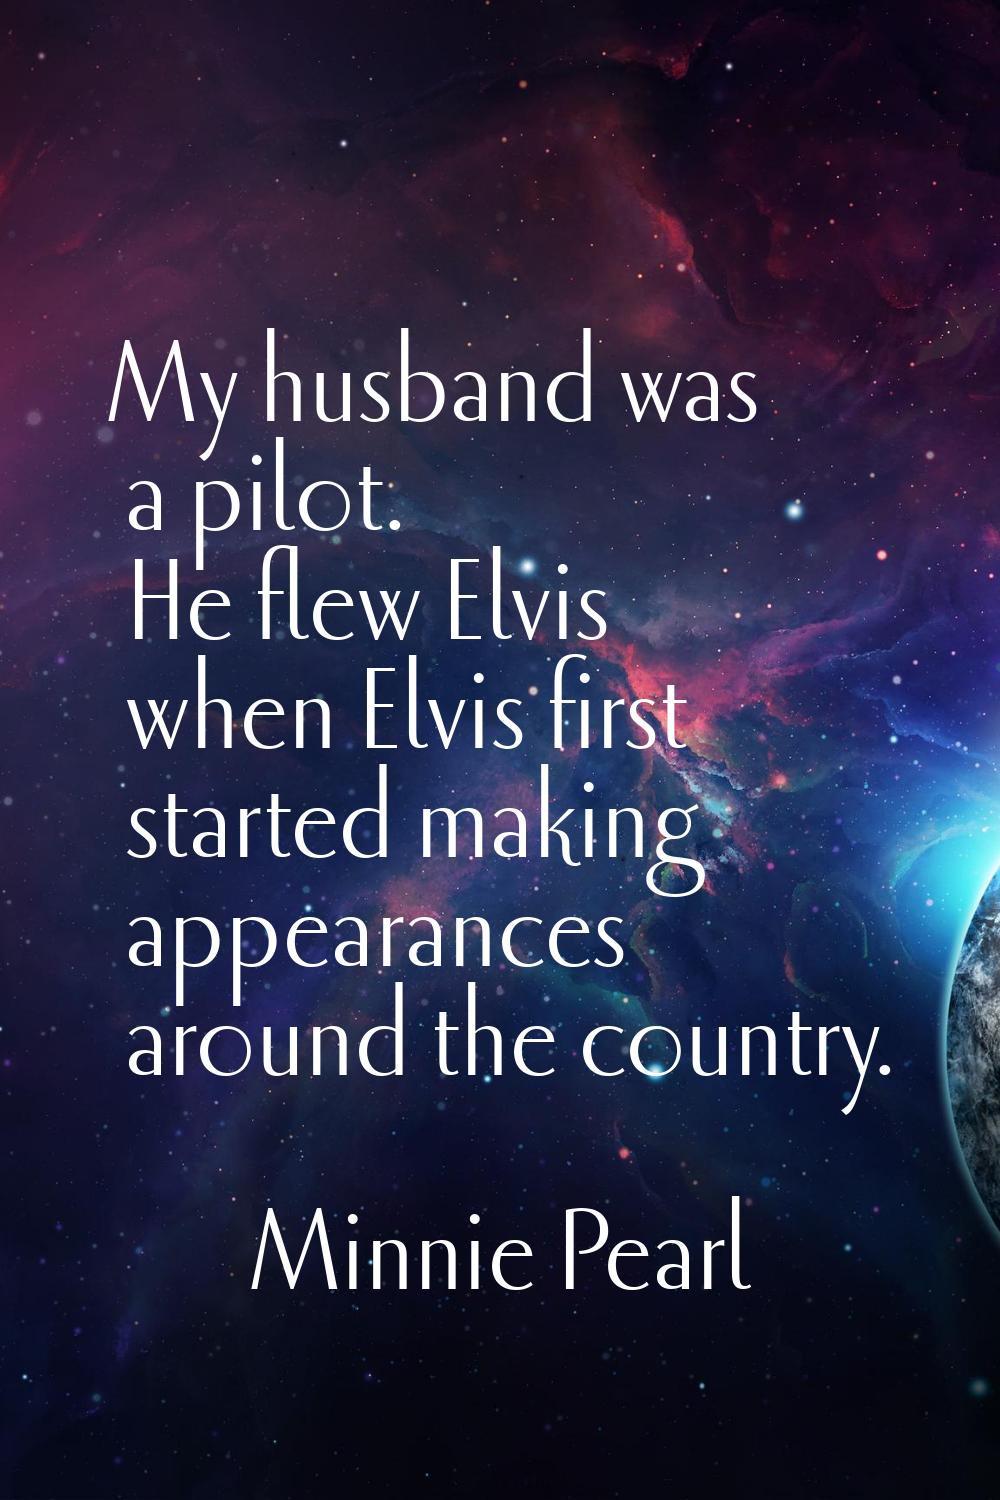 My husband was a pilot. He flew Elvis when Elvis first started making appearances around the countr